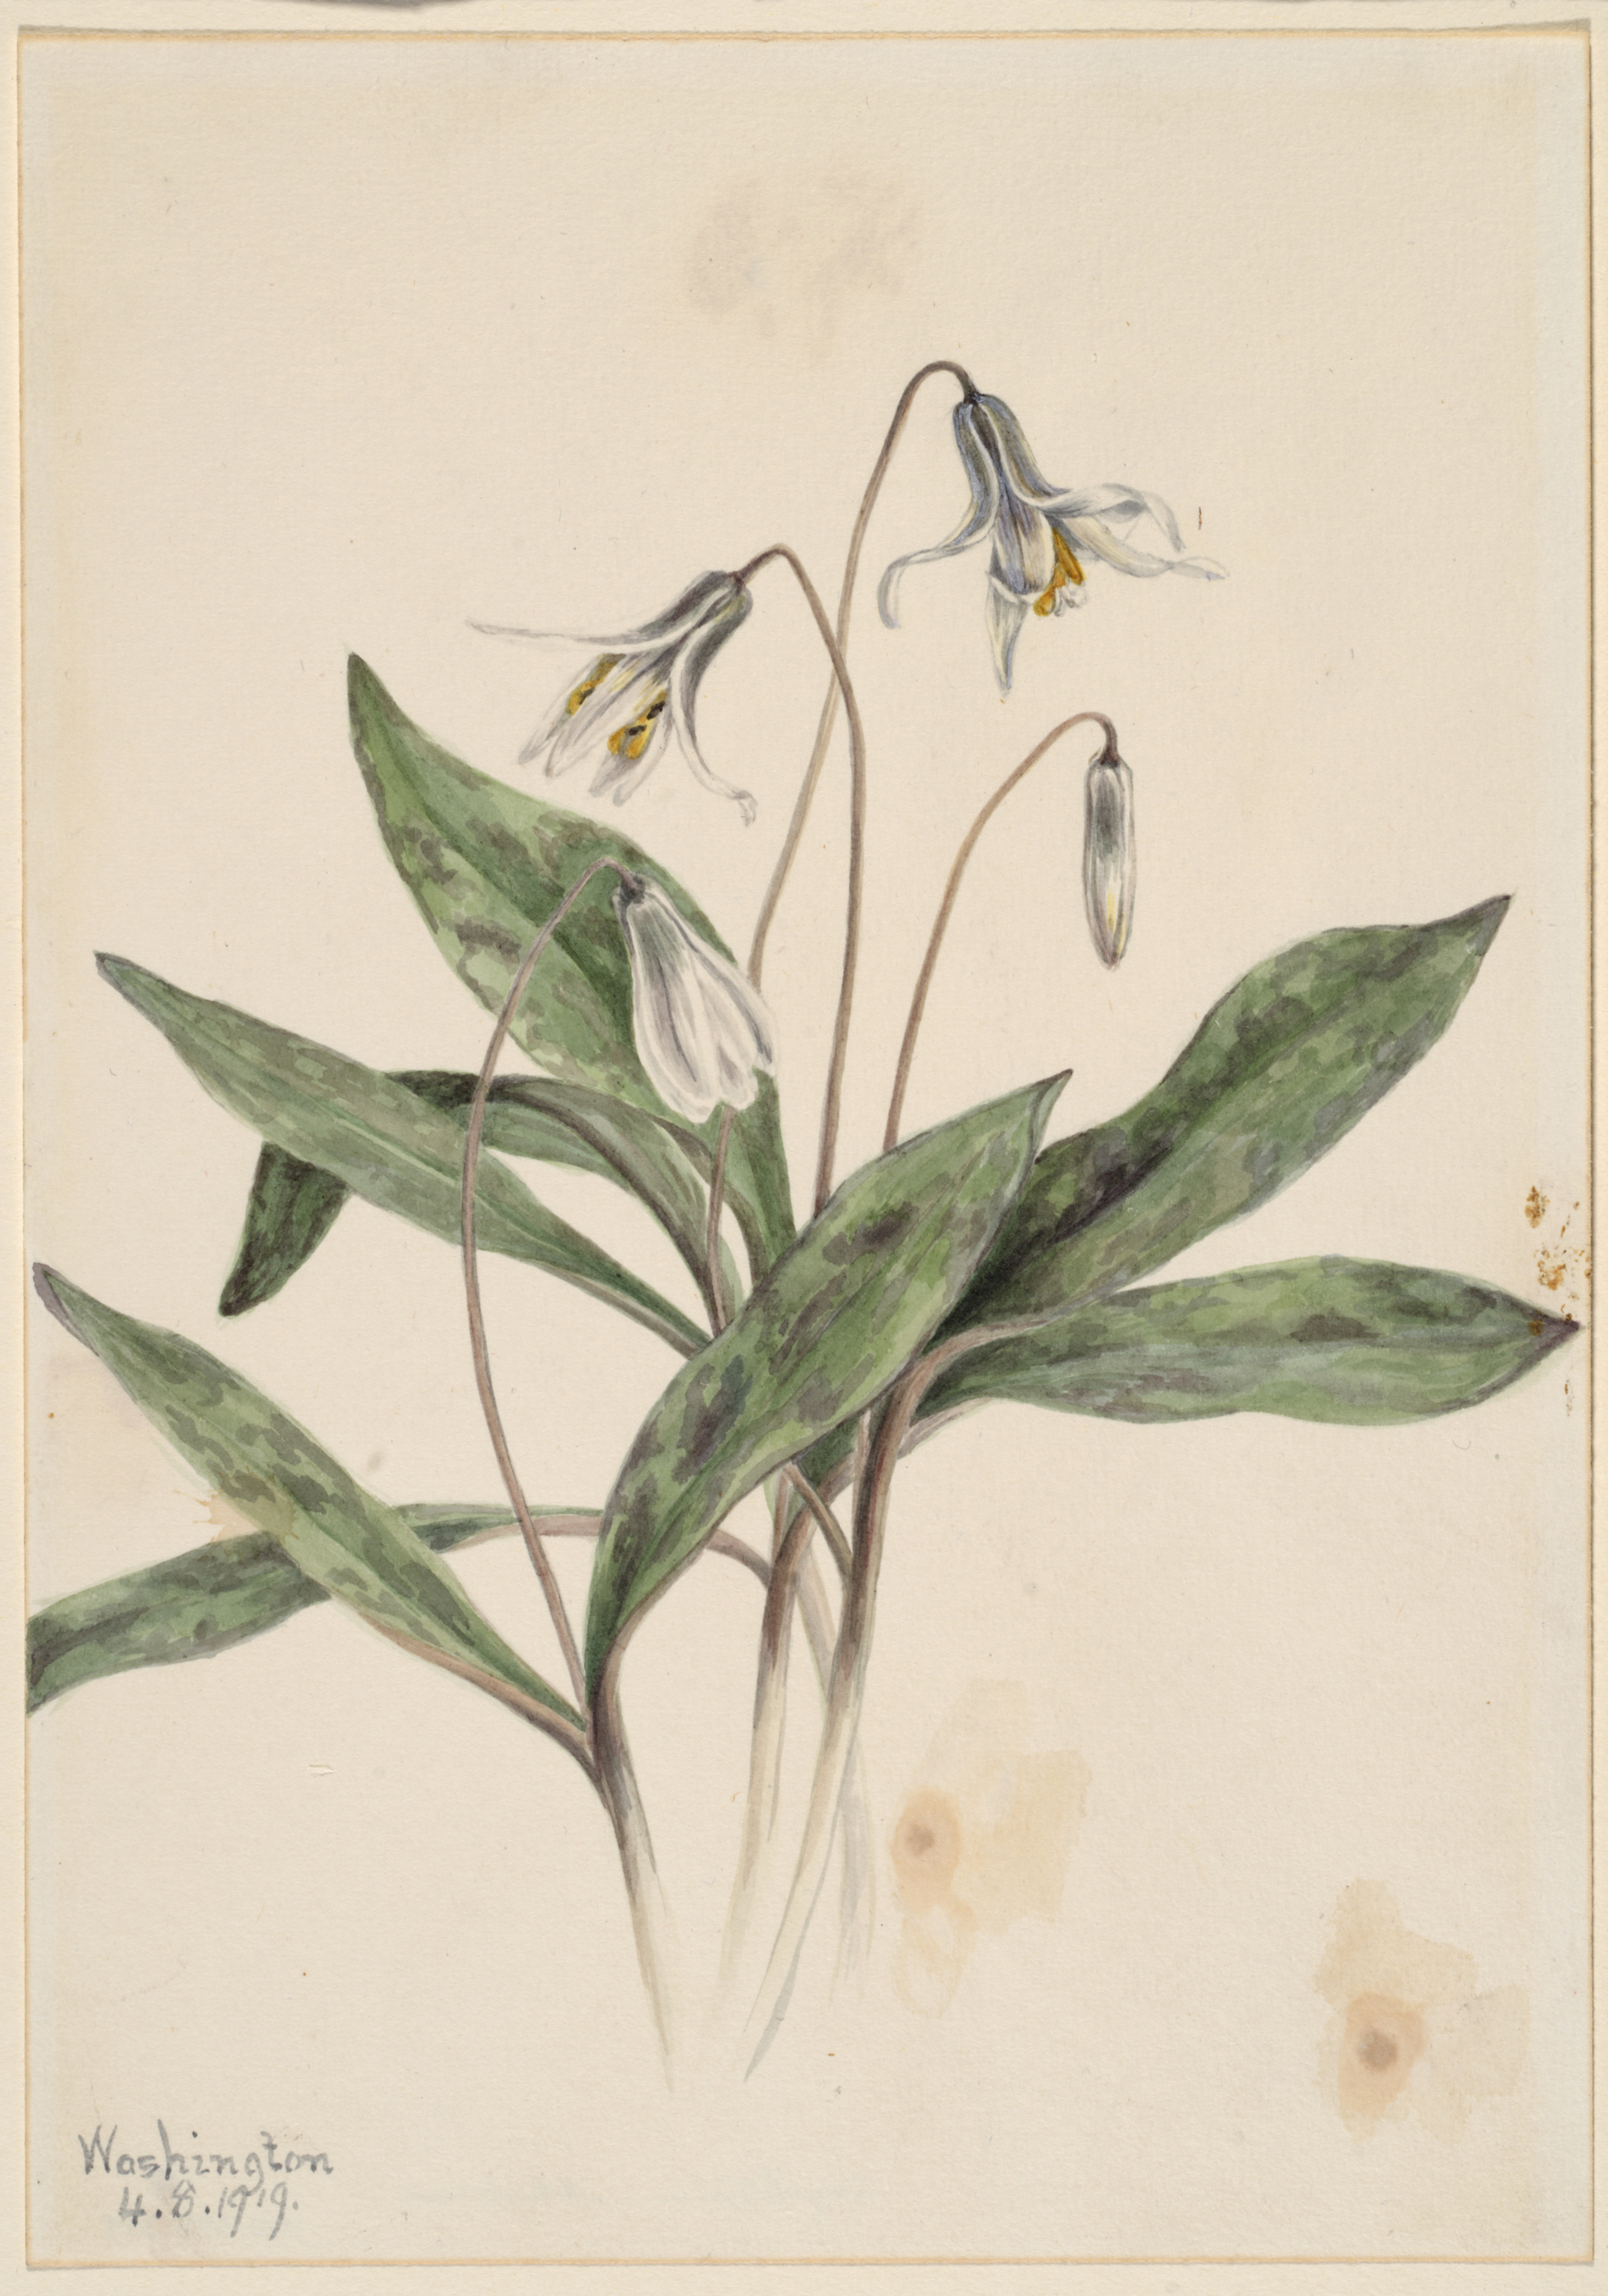 1919 Trout Lily illustration by Mary Vaux Walcott.